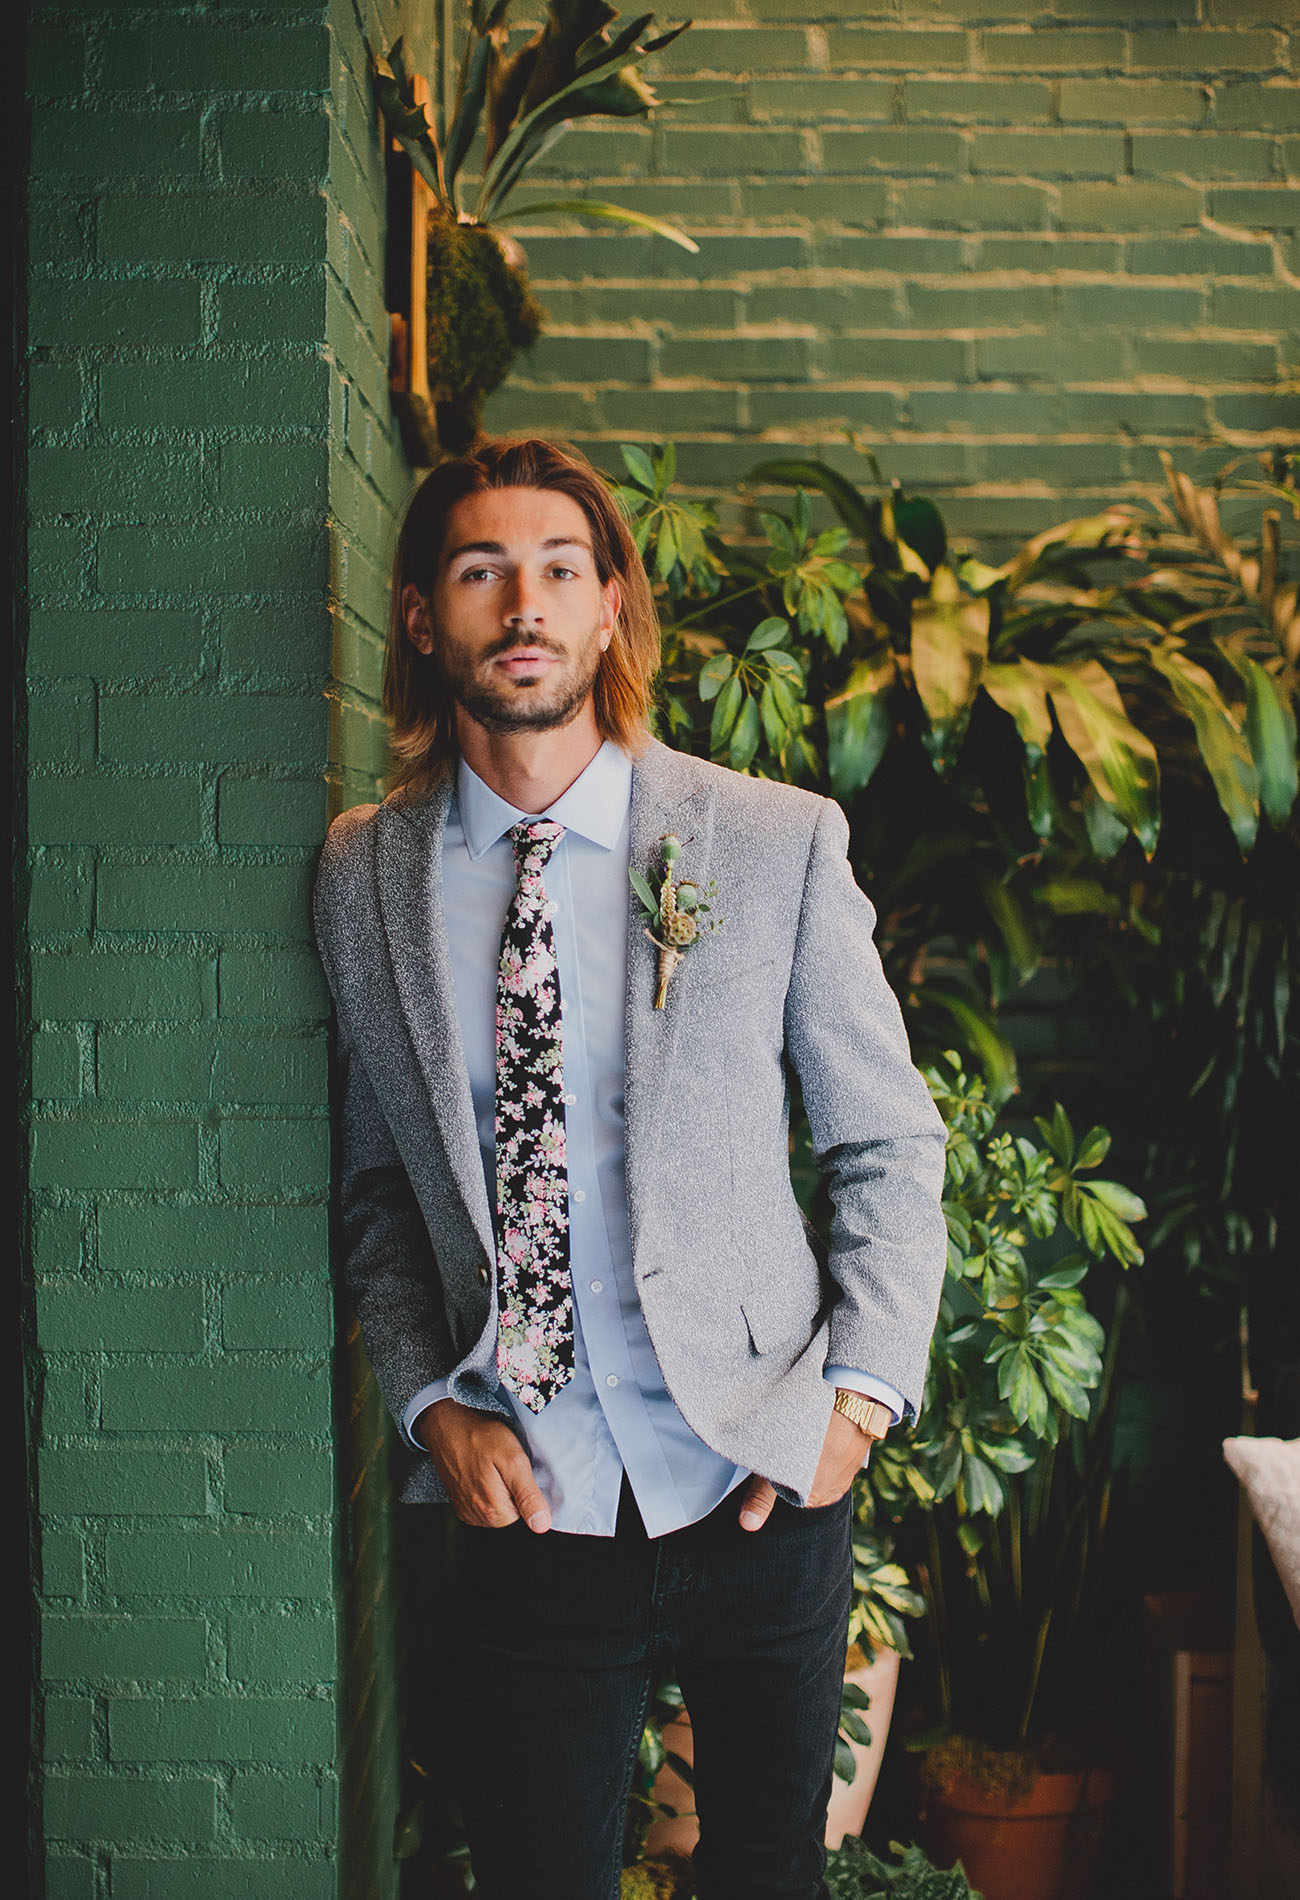 GWS x Neck & Tie Company Collection is here! The Creative's Loft Grooms